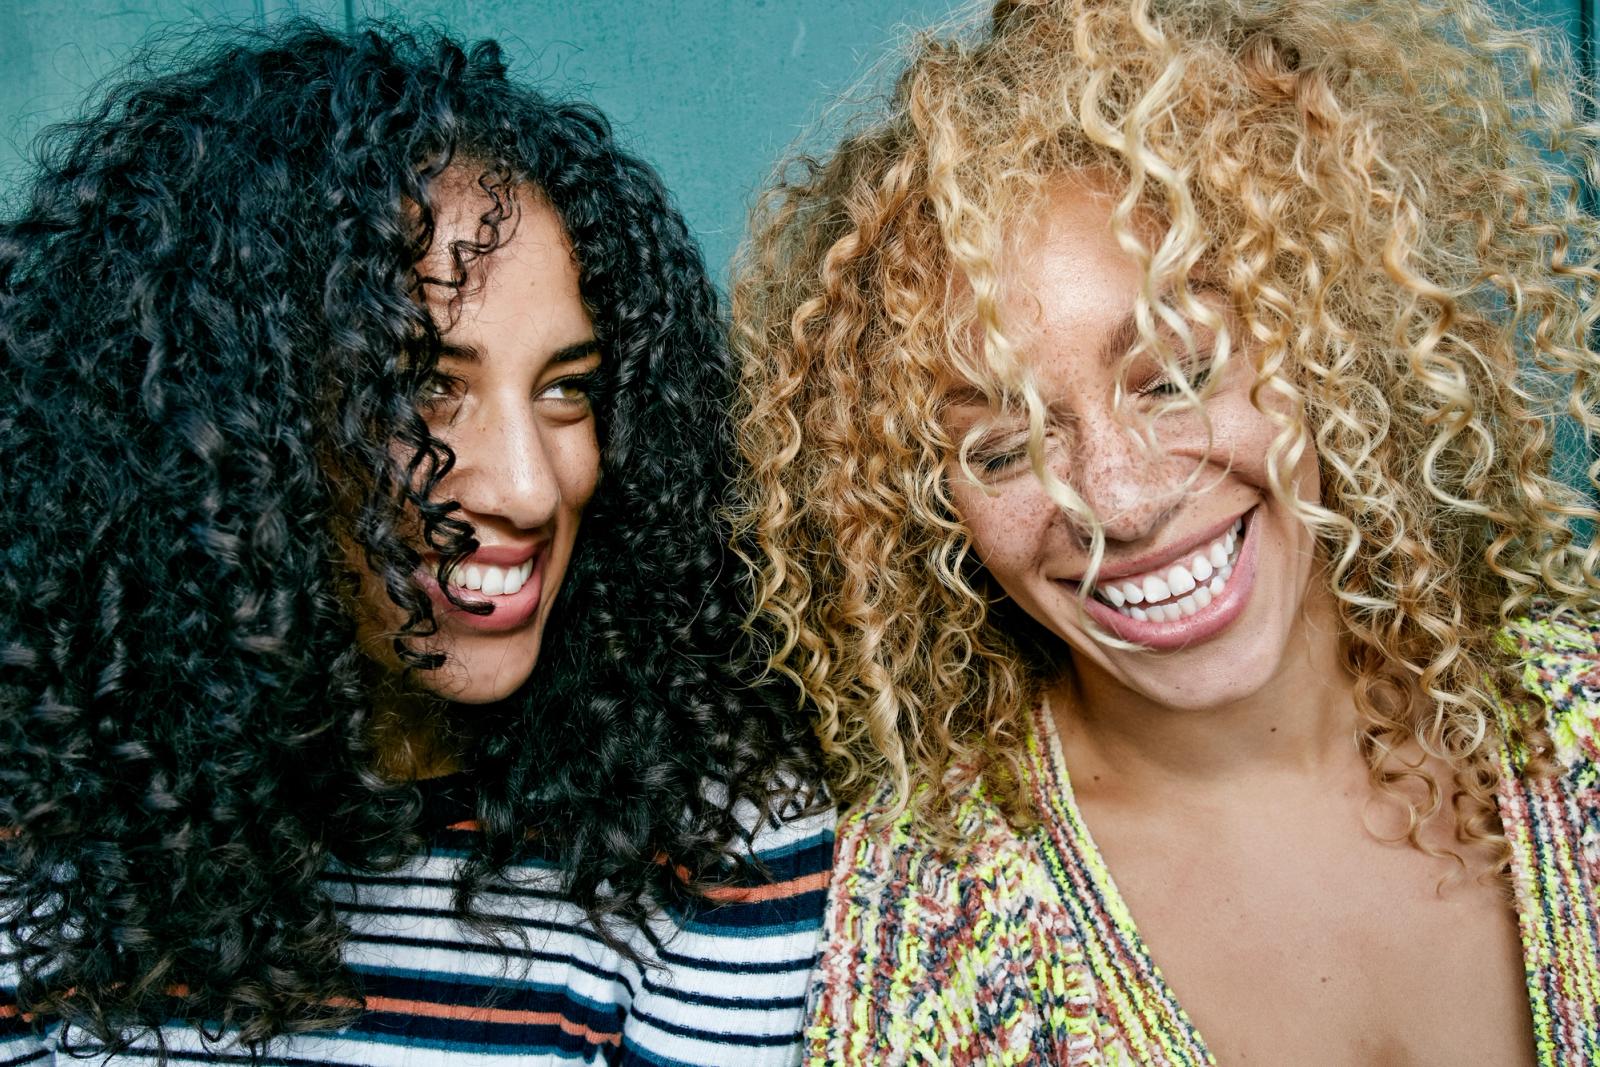 Woman with curly black hair and woman with blonde curly hair laugh standing beside each other